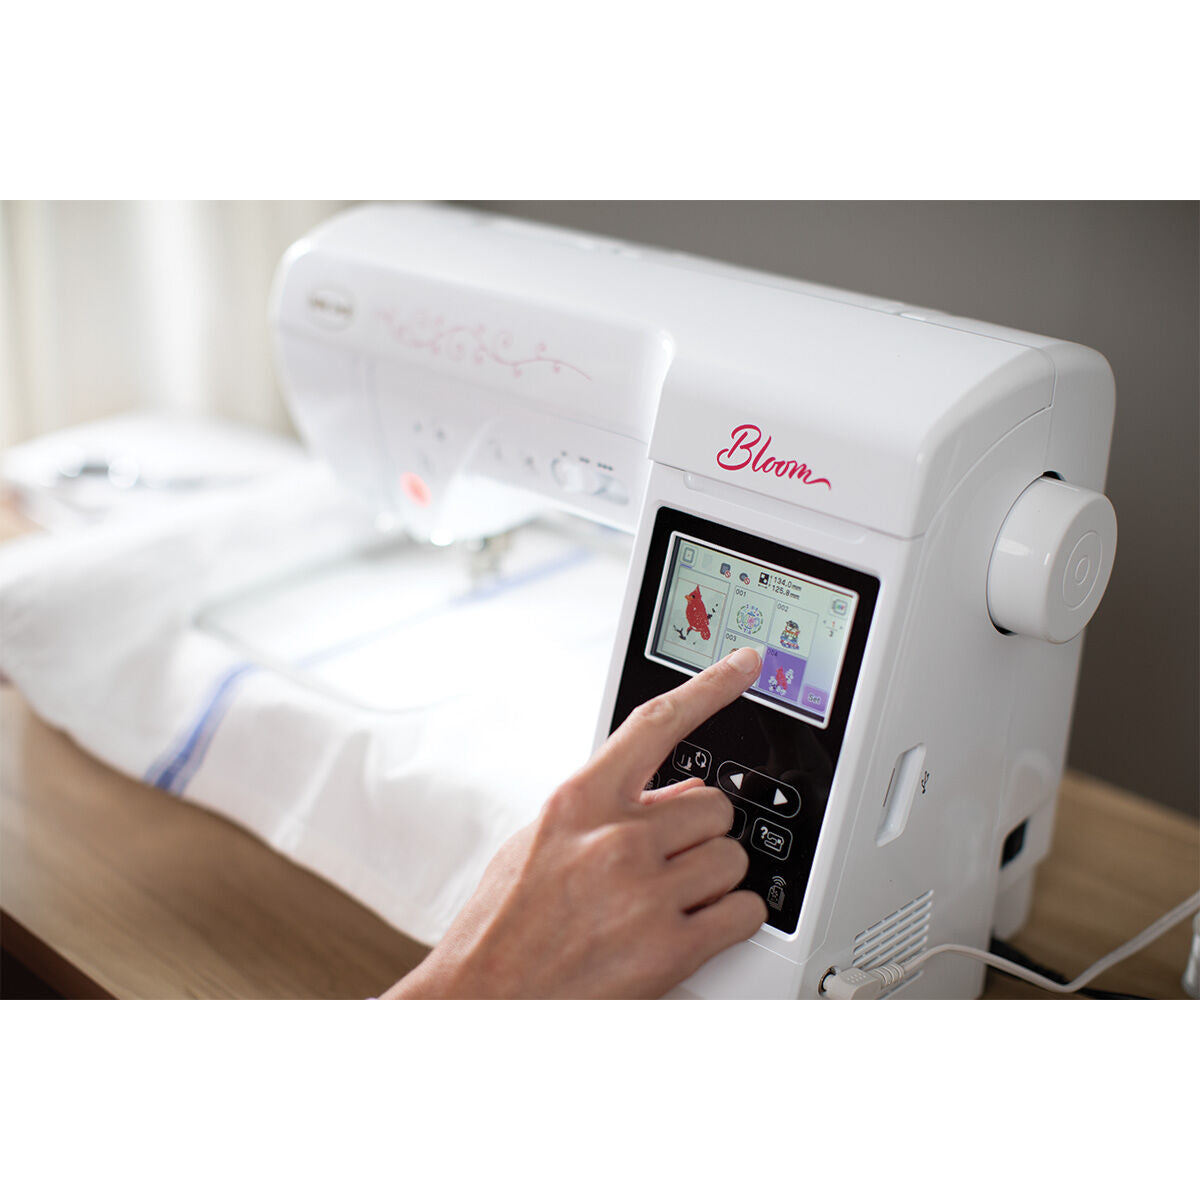 Baby Lock Bloom Sewing & Embroidery Machine,Baby Lock Bloom Sewing & Embroidery Machine,Baby Lock Bloom Sewing & Embroidery Machine
,Baby Lock Bloom Sewing & Embroidery Machine
,Baby Lock Bloom Sewing & Embroidery Machine
,Baby Lock Bloom Sewing & Embroidery Machine
,Baby Lock Bloom Sewing & Embroidery Machine
,Baby Lock Bloom Sewing & Embroidery Machine
,Baby Lock Bloom Sewing & Embroidery Machine
,Baby Lock Bloom Sewing & Embroidery Machine
,Baby Lock Bloom Sewing & Embroidery Machine
